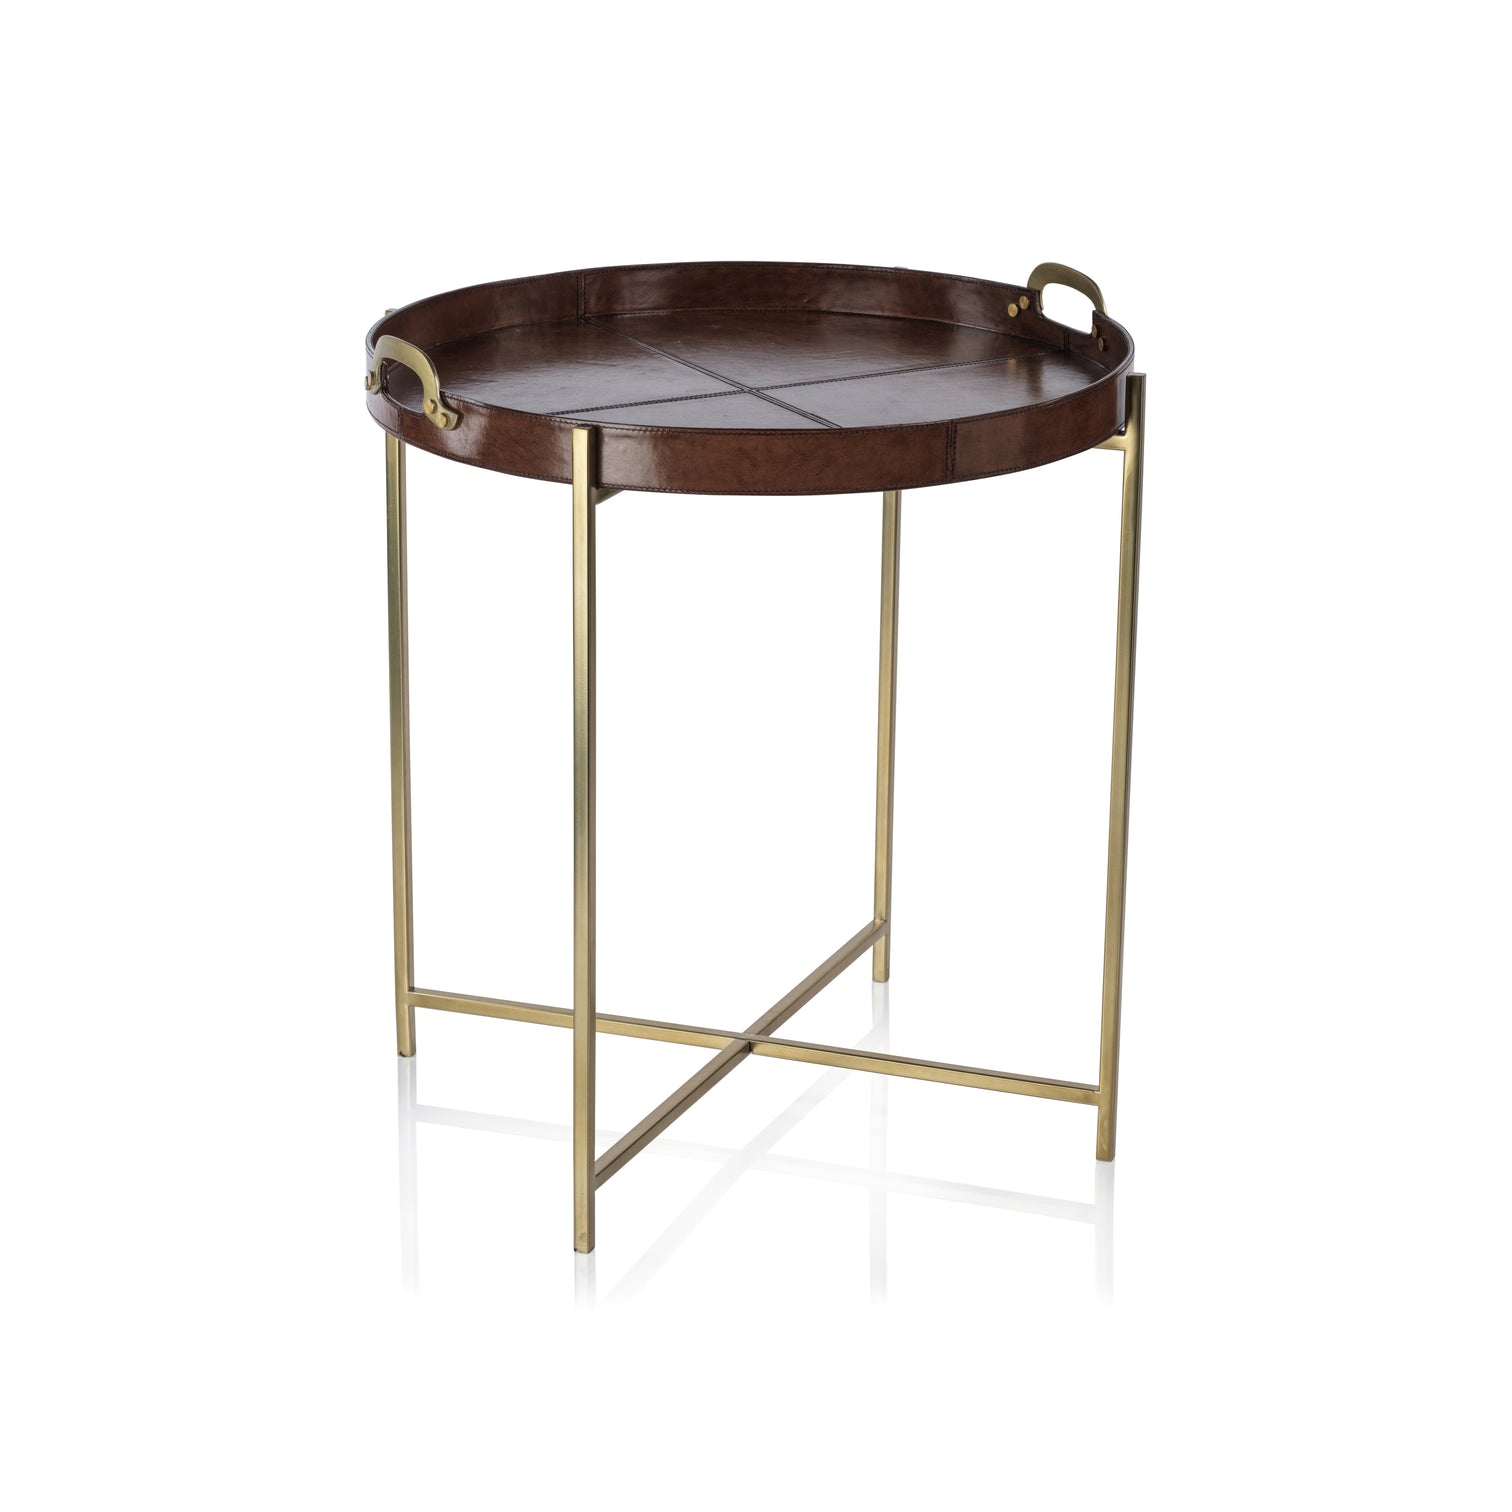 Aspen Leather with Brass Handles Round Tray on Stand